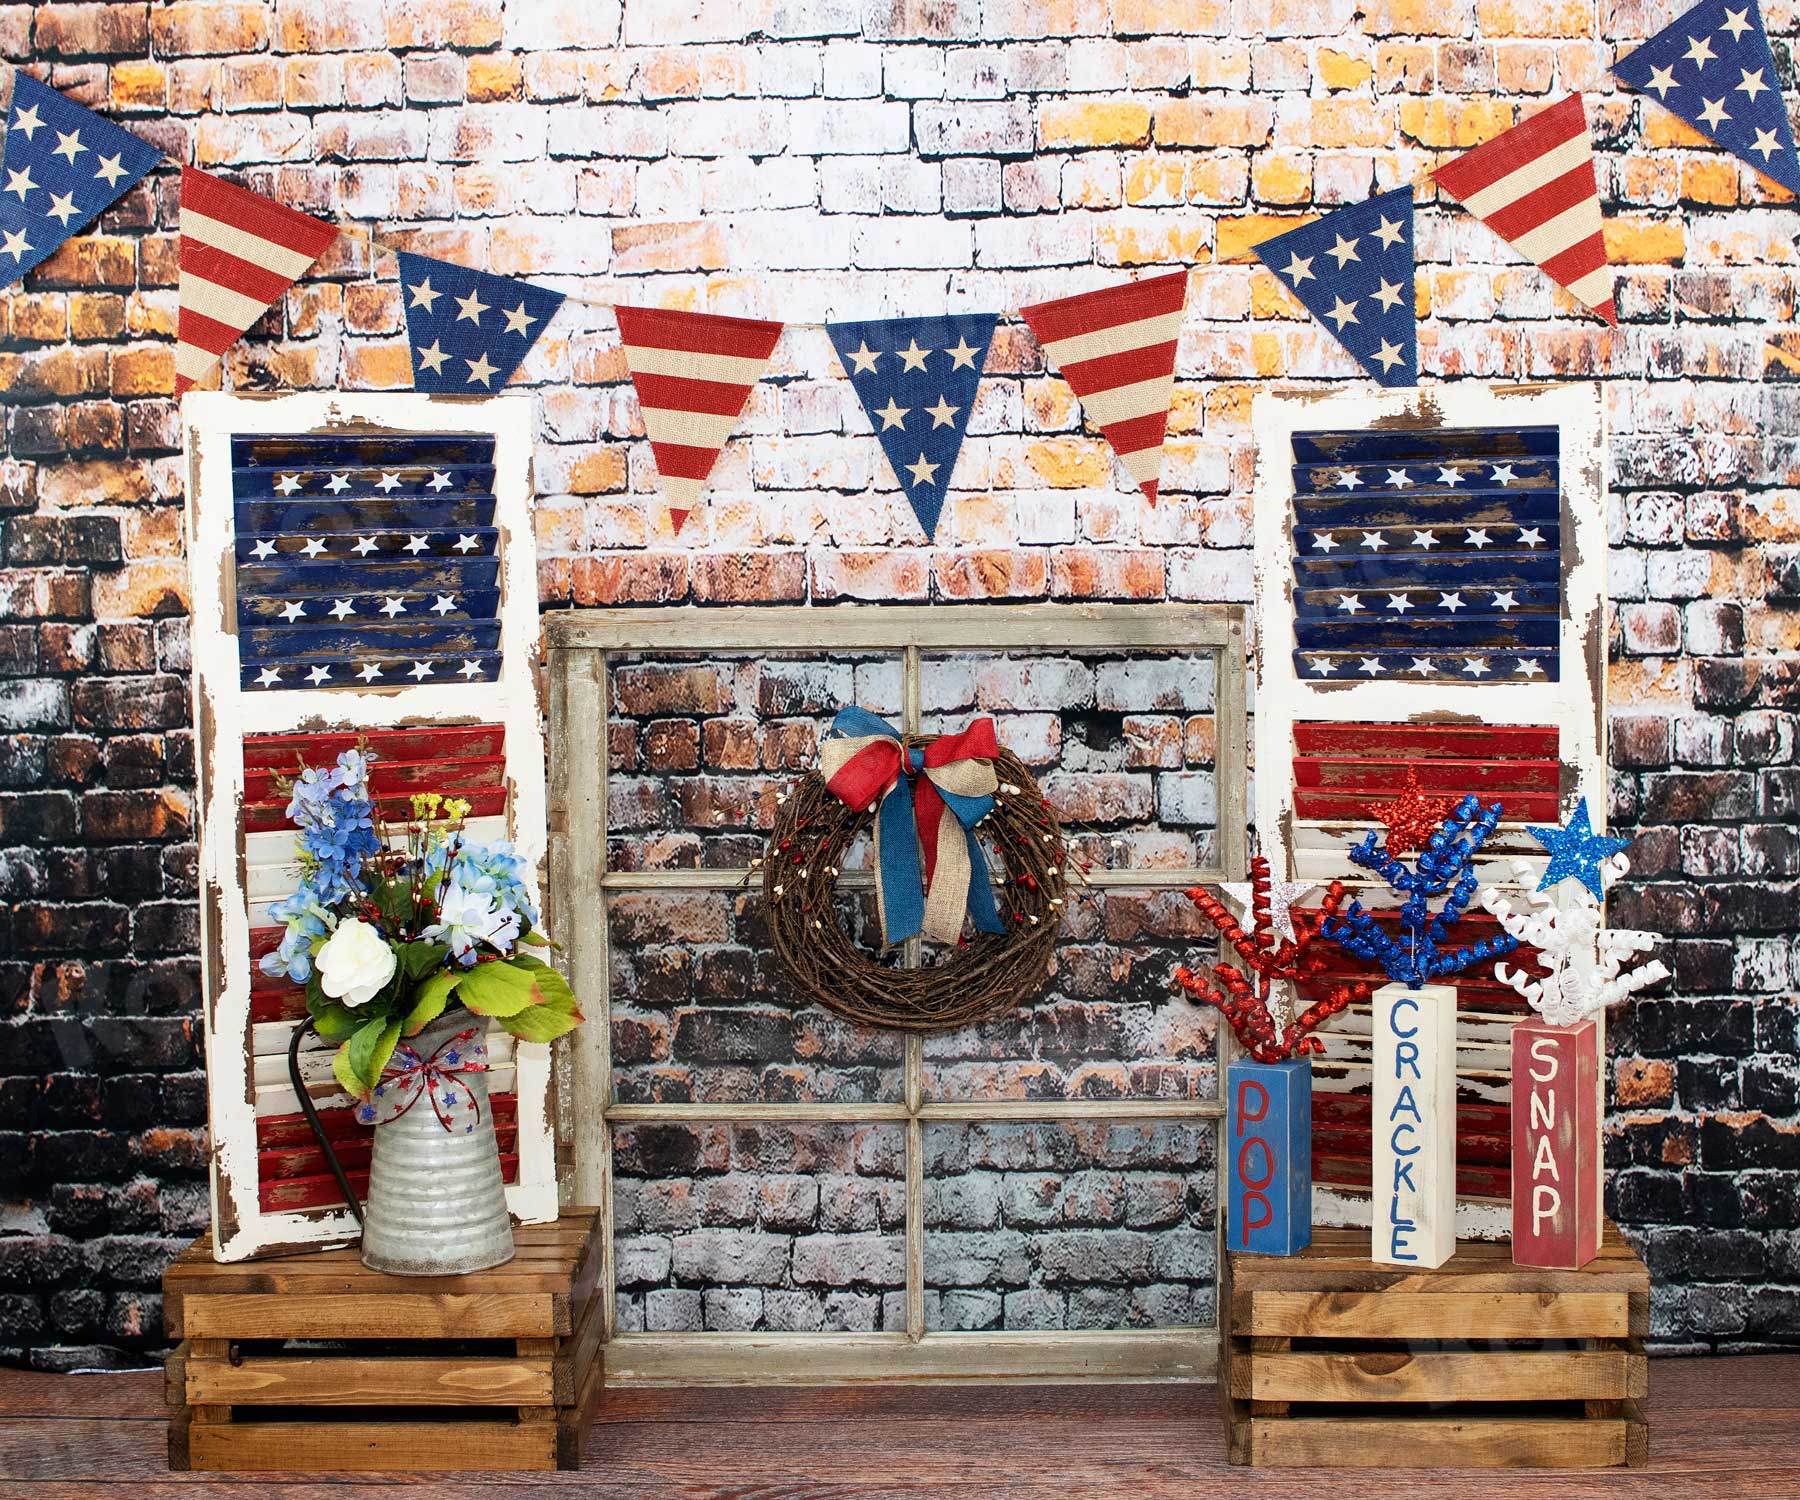 Kate Retro Brick with Window Decorations Independence Day Backdrop for Photography Designed by Leann West